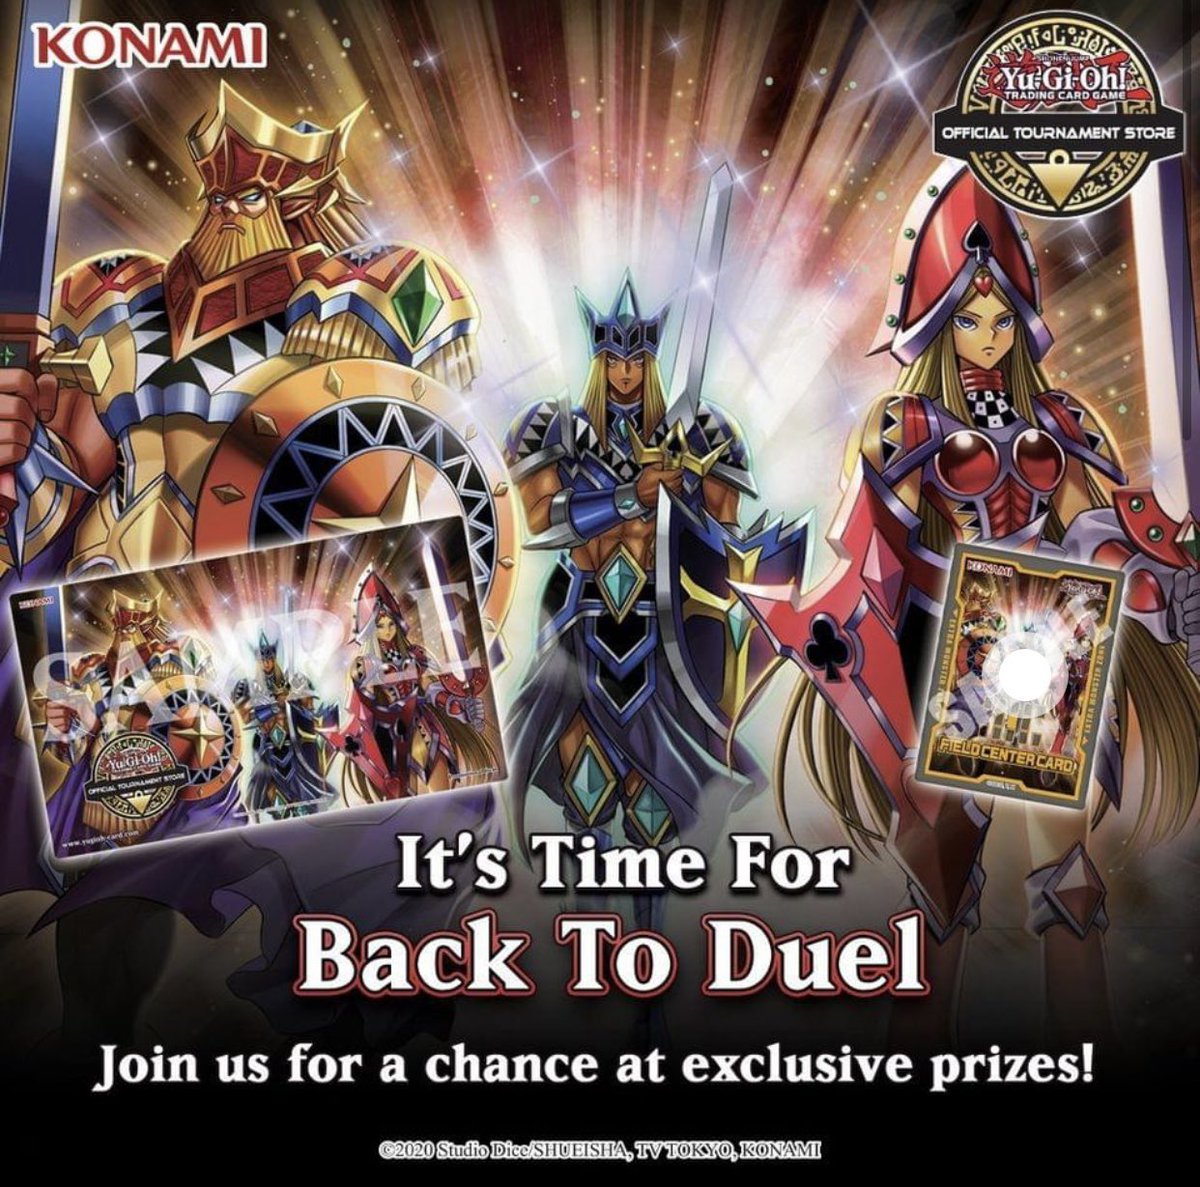 ❰𝗕𝗮𝗰𝗸 𝘁𝗼 𝗗𝘂𝗲𝗹❱Back to Duel Prizing for JuneBack to Duel is a new Organized Pl...